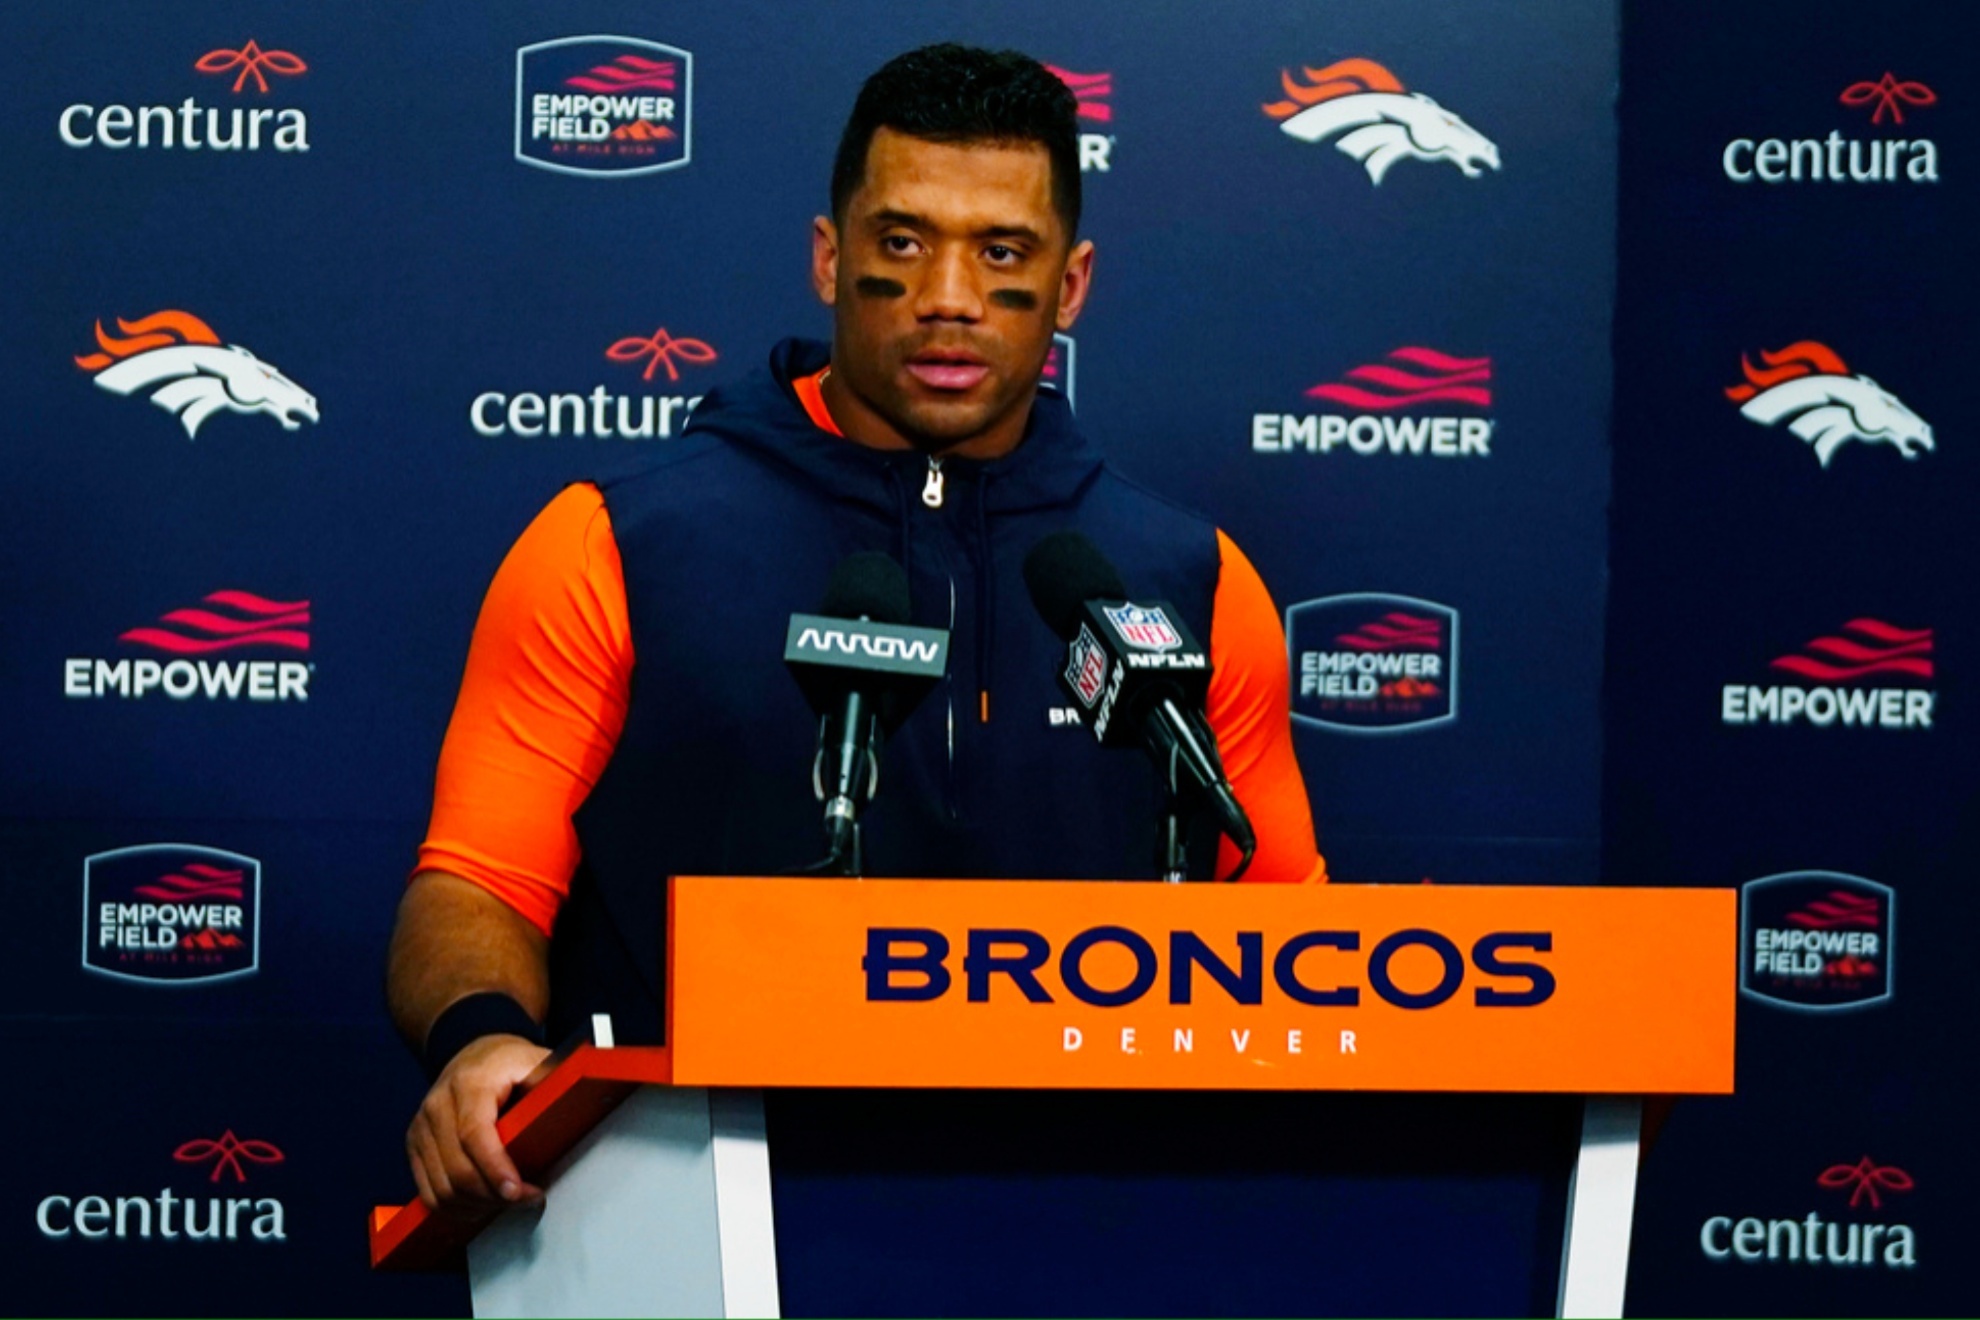 Russell Wilson at a press conference after the loss to the Pats on Dec. 24.